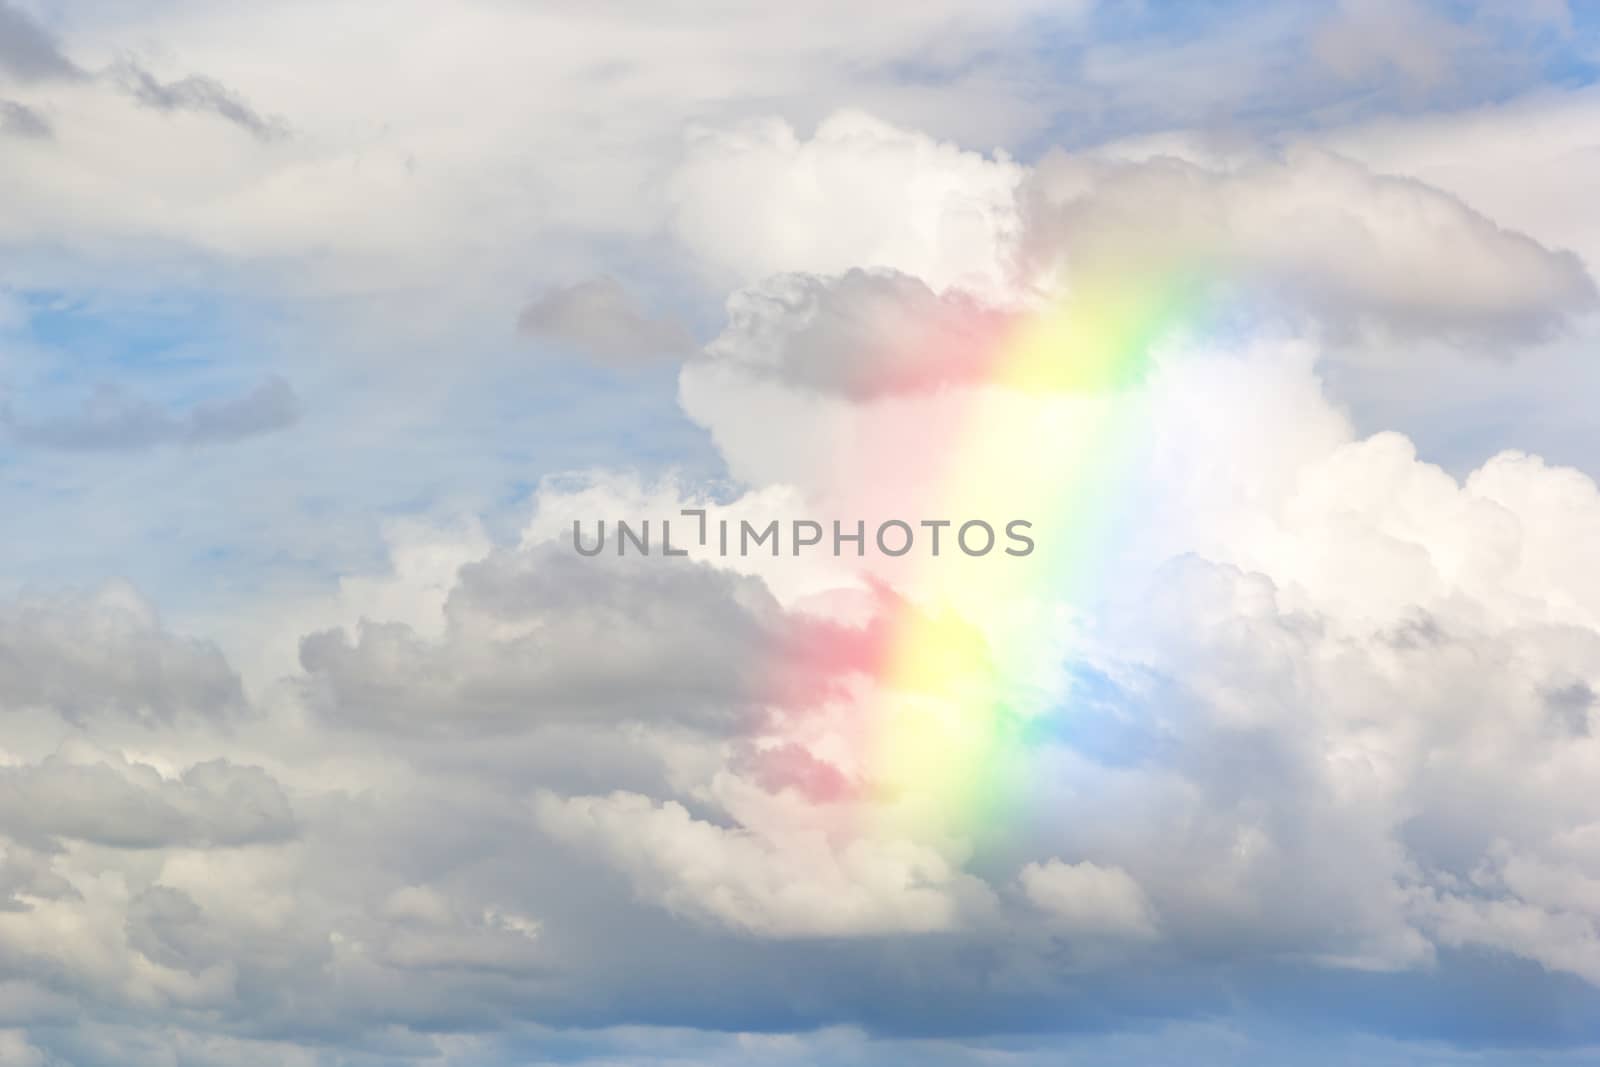 Beautiful Classic Rainbow Across In The Blue Sky After The Rain, Rainbow Is A Natural Phenomenon That Occurs After Rain, Rainbow Consists Of Purple, Indigo Blue, Blue, Green, Yellow, Orange And Red.
